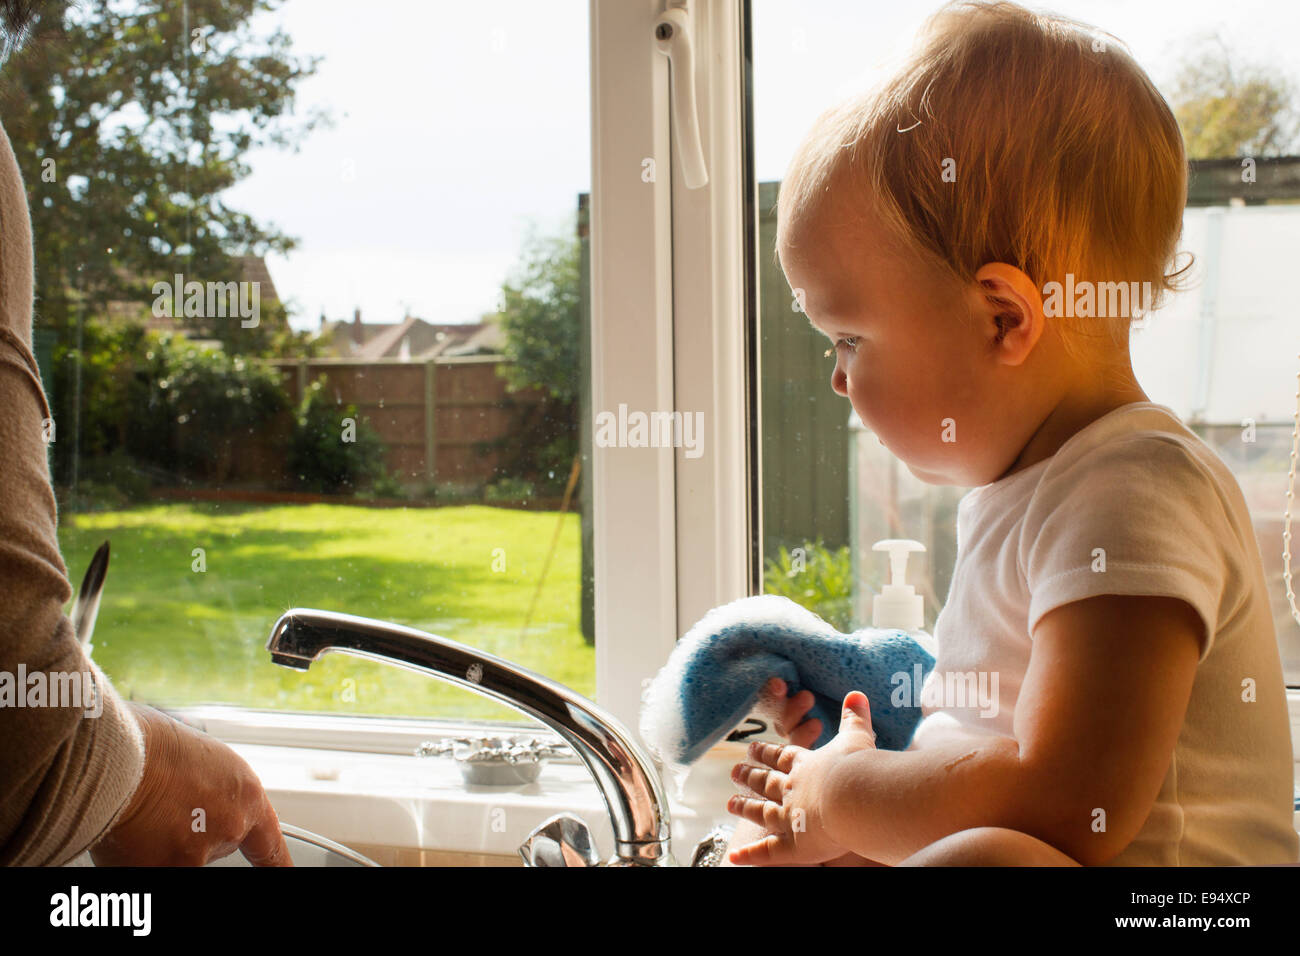 Baby helping to wash up. Stock Photo